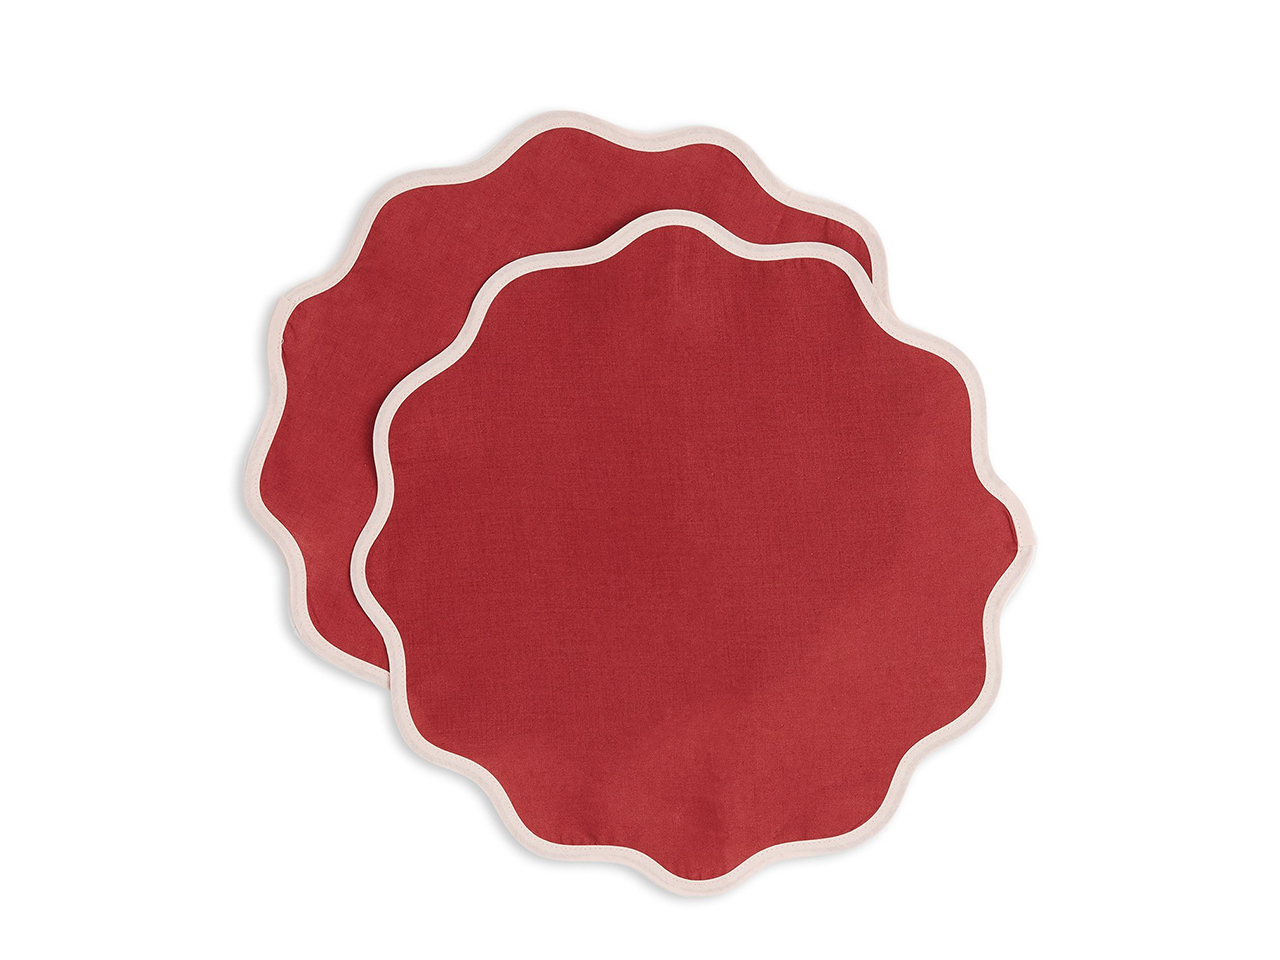 Two pink and red scalloped placemats from La DoubleJ for outdoor entertaining.